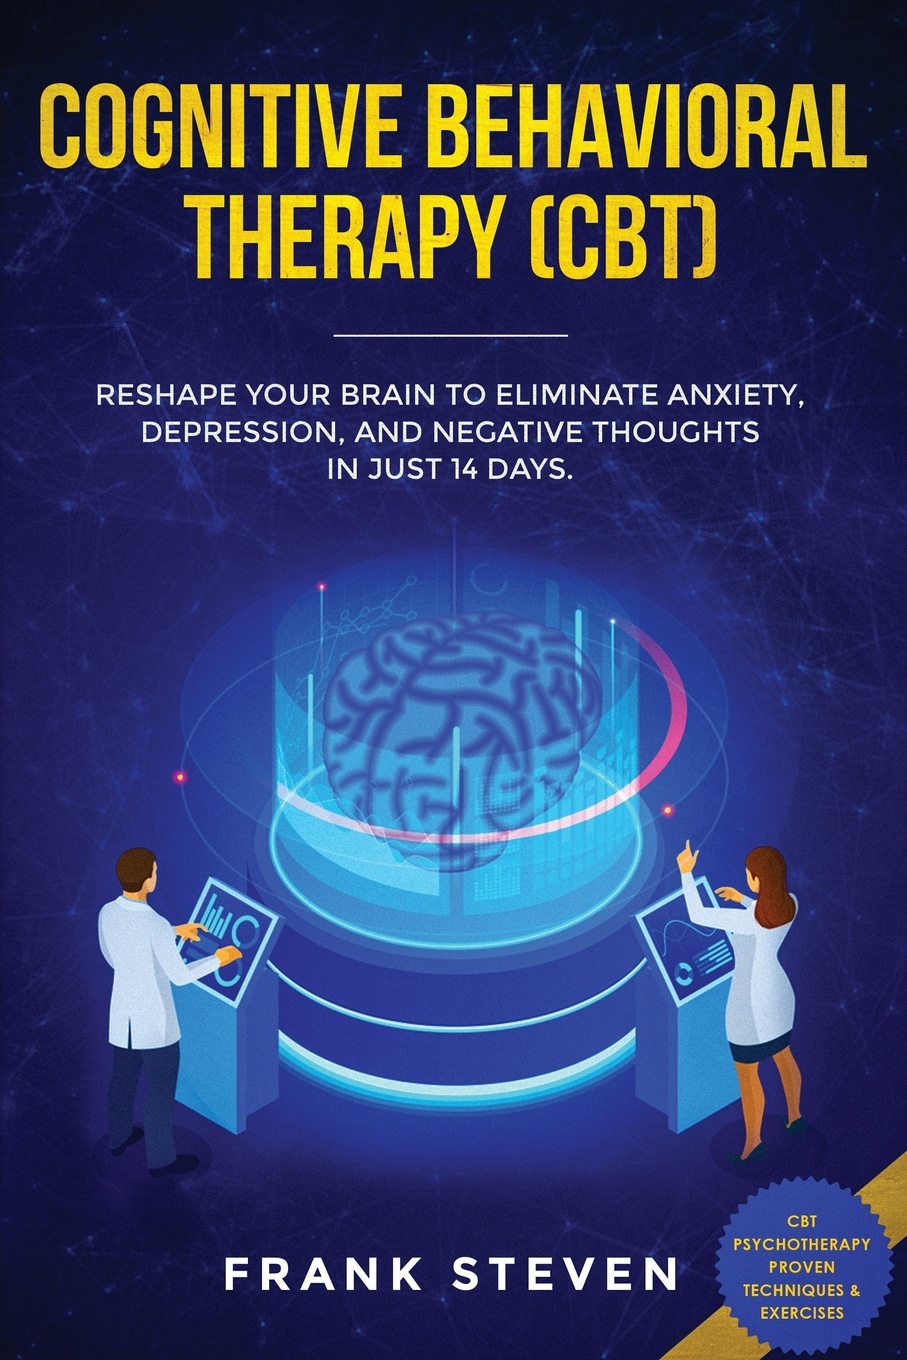 Cognitive Behavioral Therapy (CBT). Reshape Your Brain to Eliminate Anxiety, Depression, and Negative Thoughts in Just 14 Days: CBT Psychotherapy Proven Techniques & Exercises